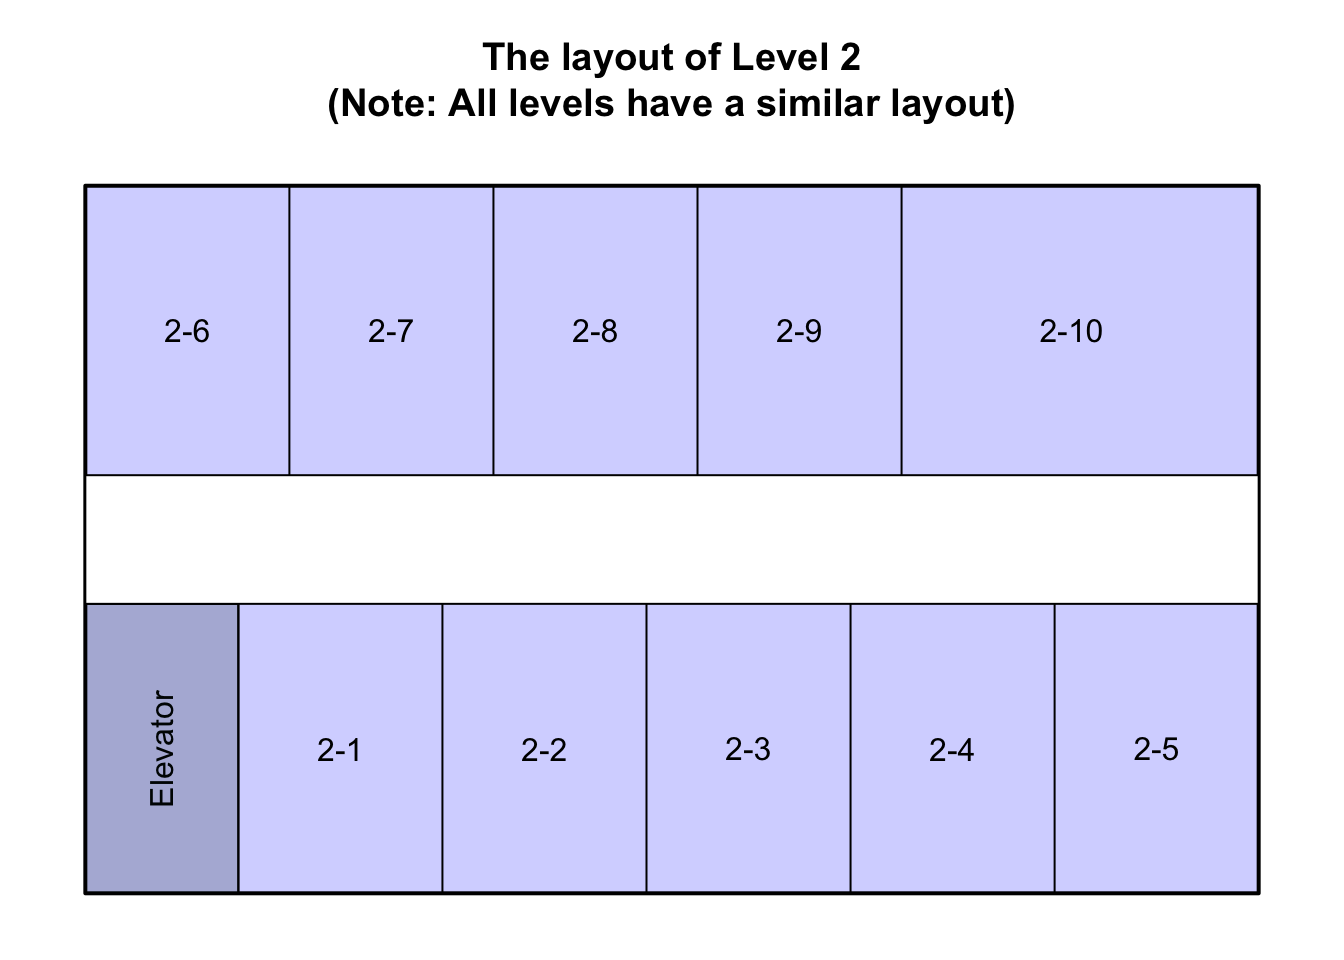 The layout of each level in an eight-storey apartment building; Level 2 is shown